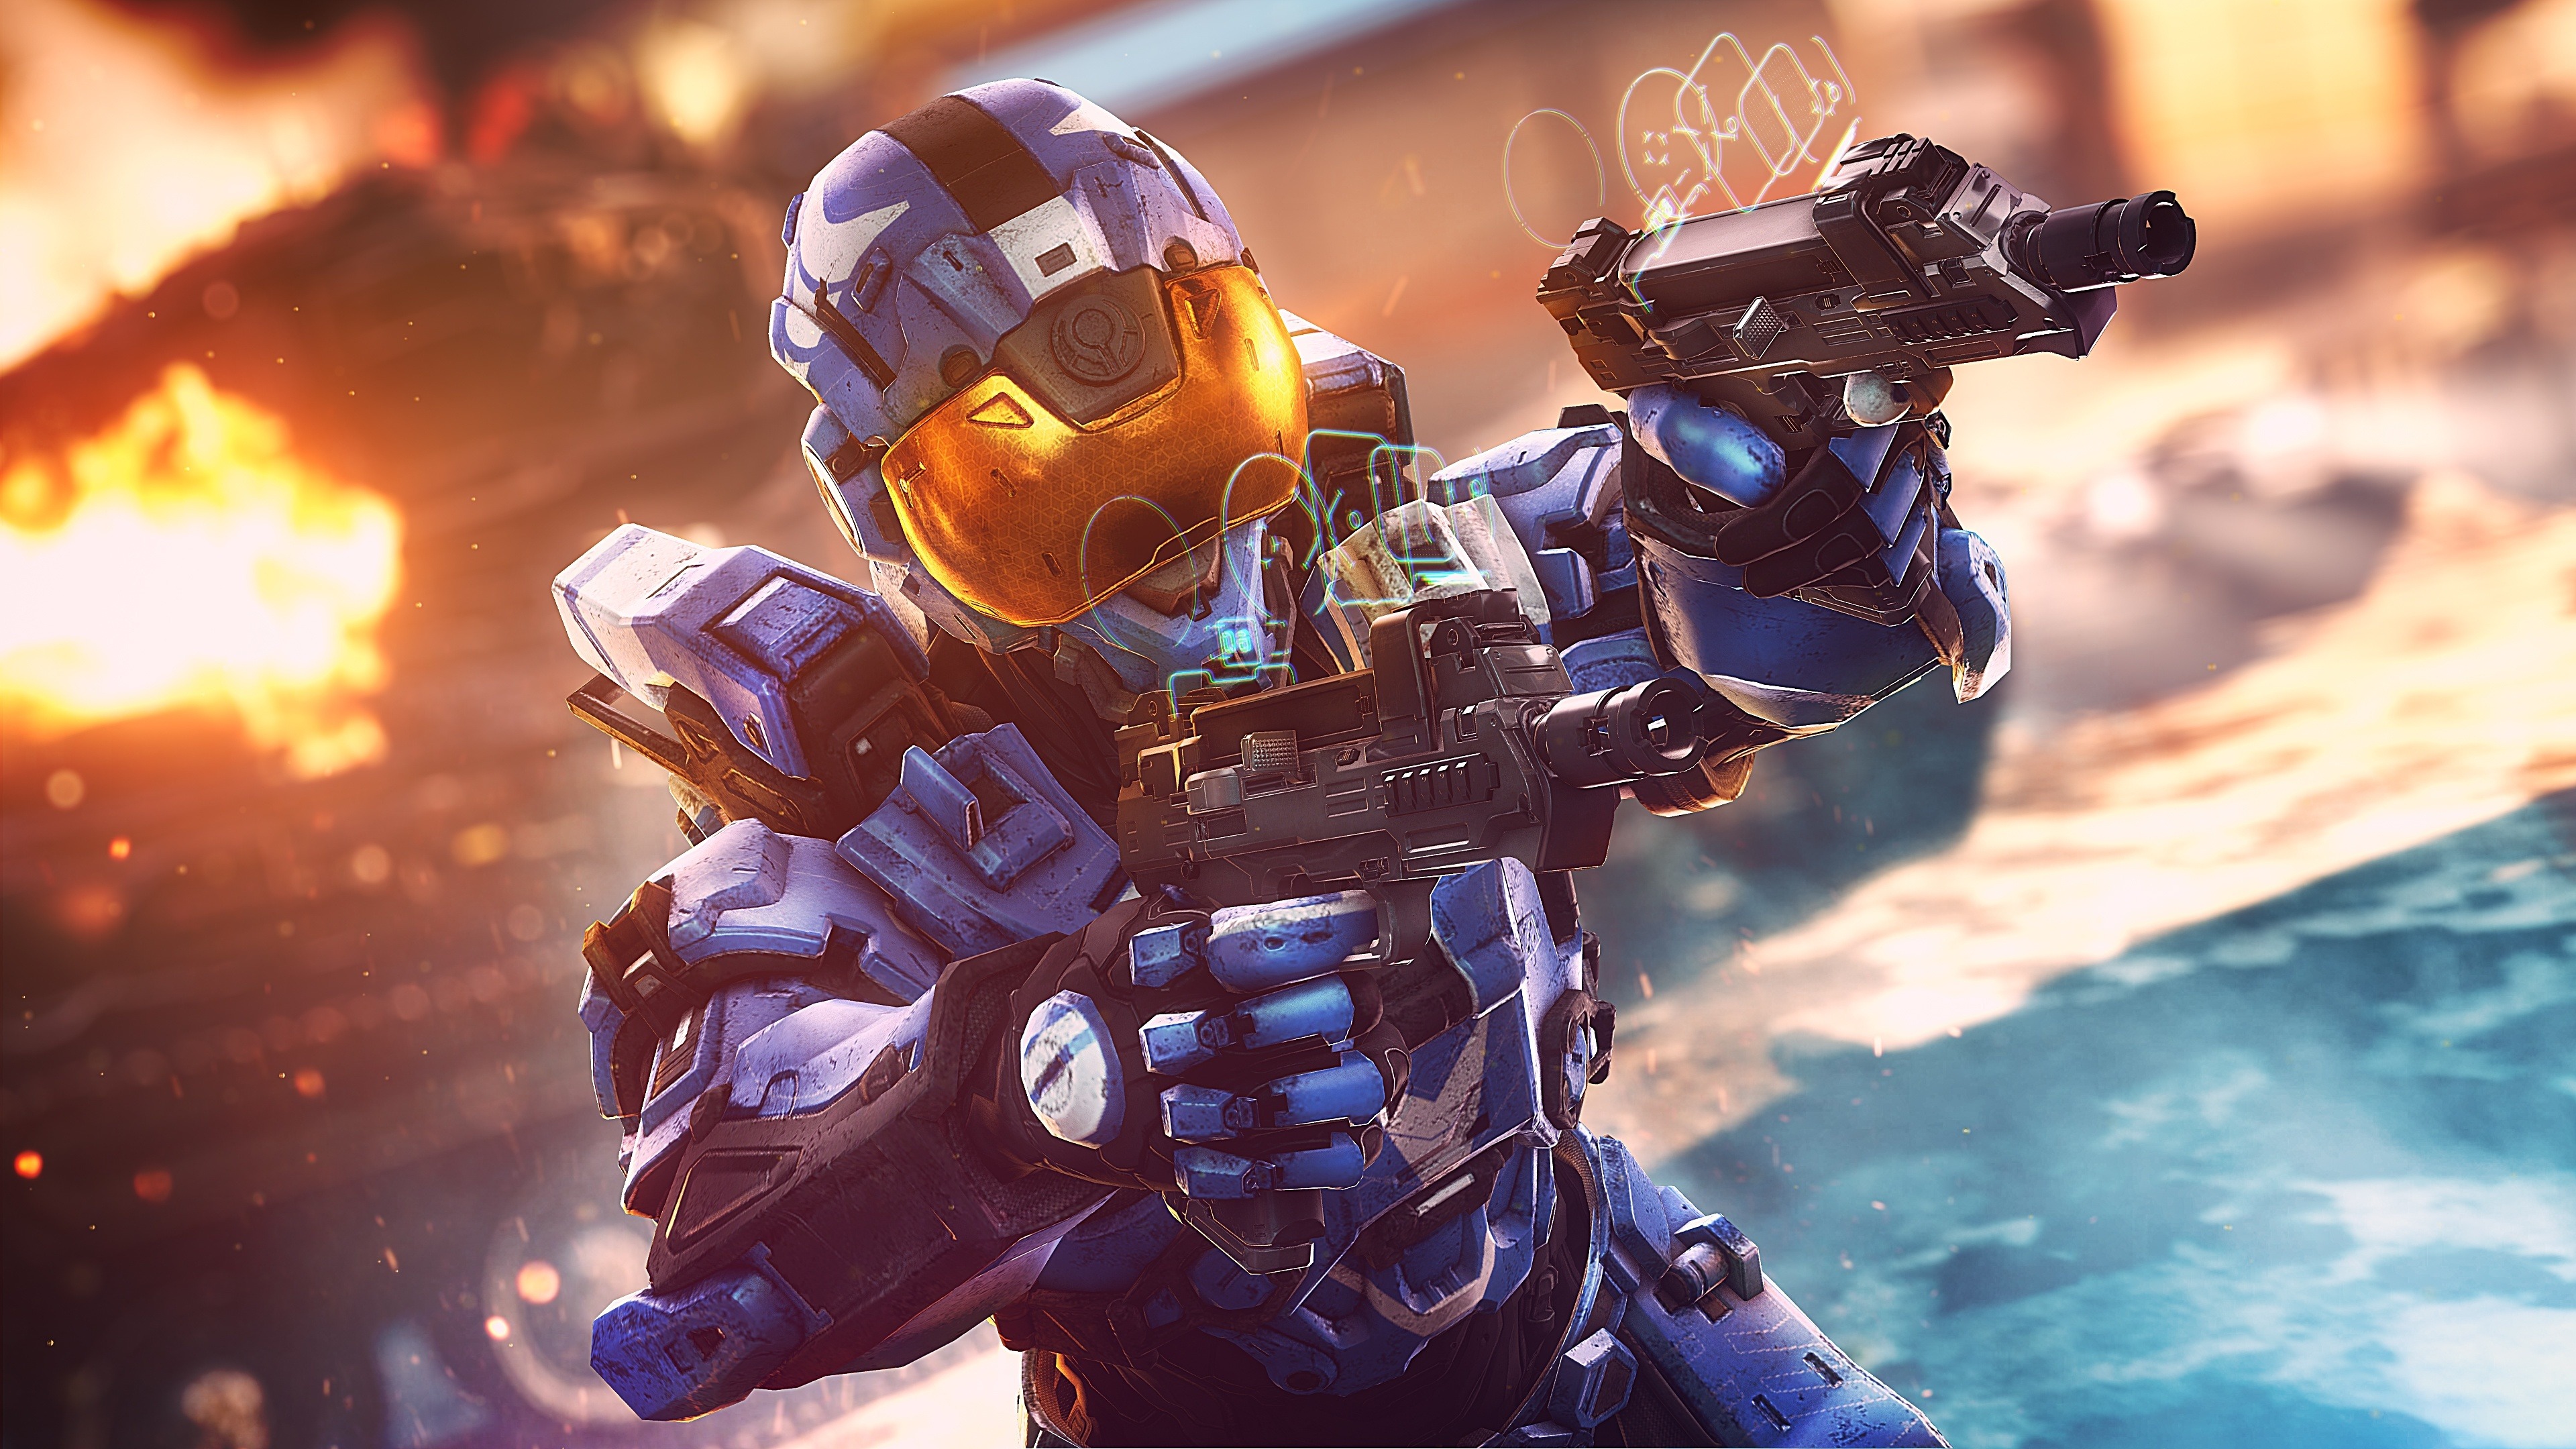 Download 3840x2400 wallpaper halo, smart scopes, soldier